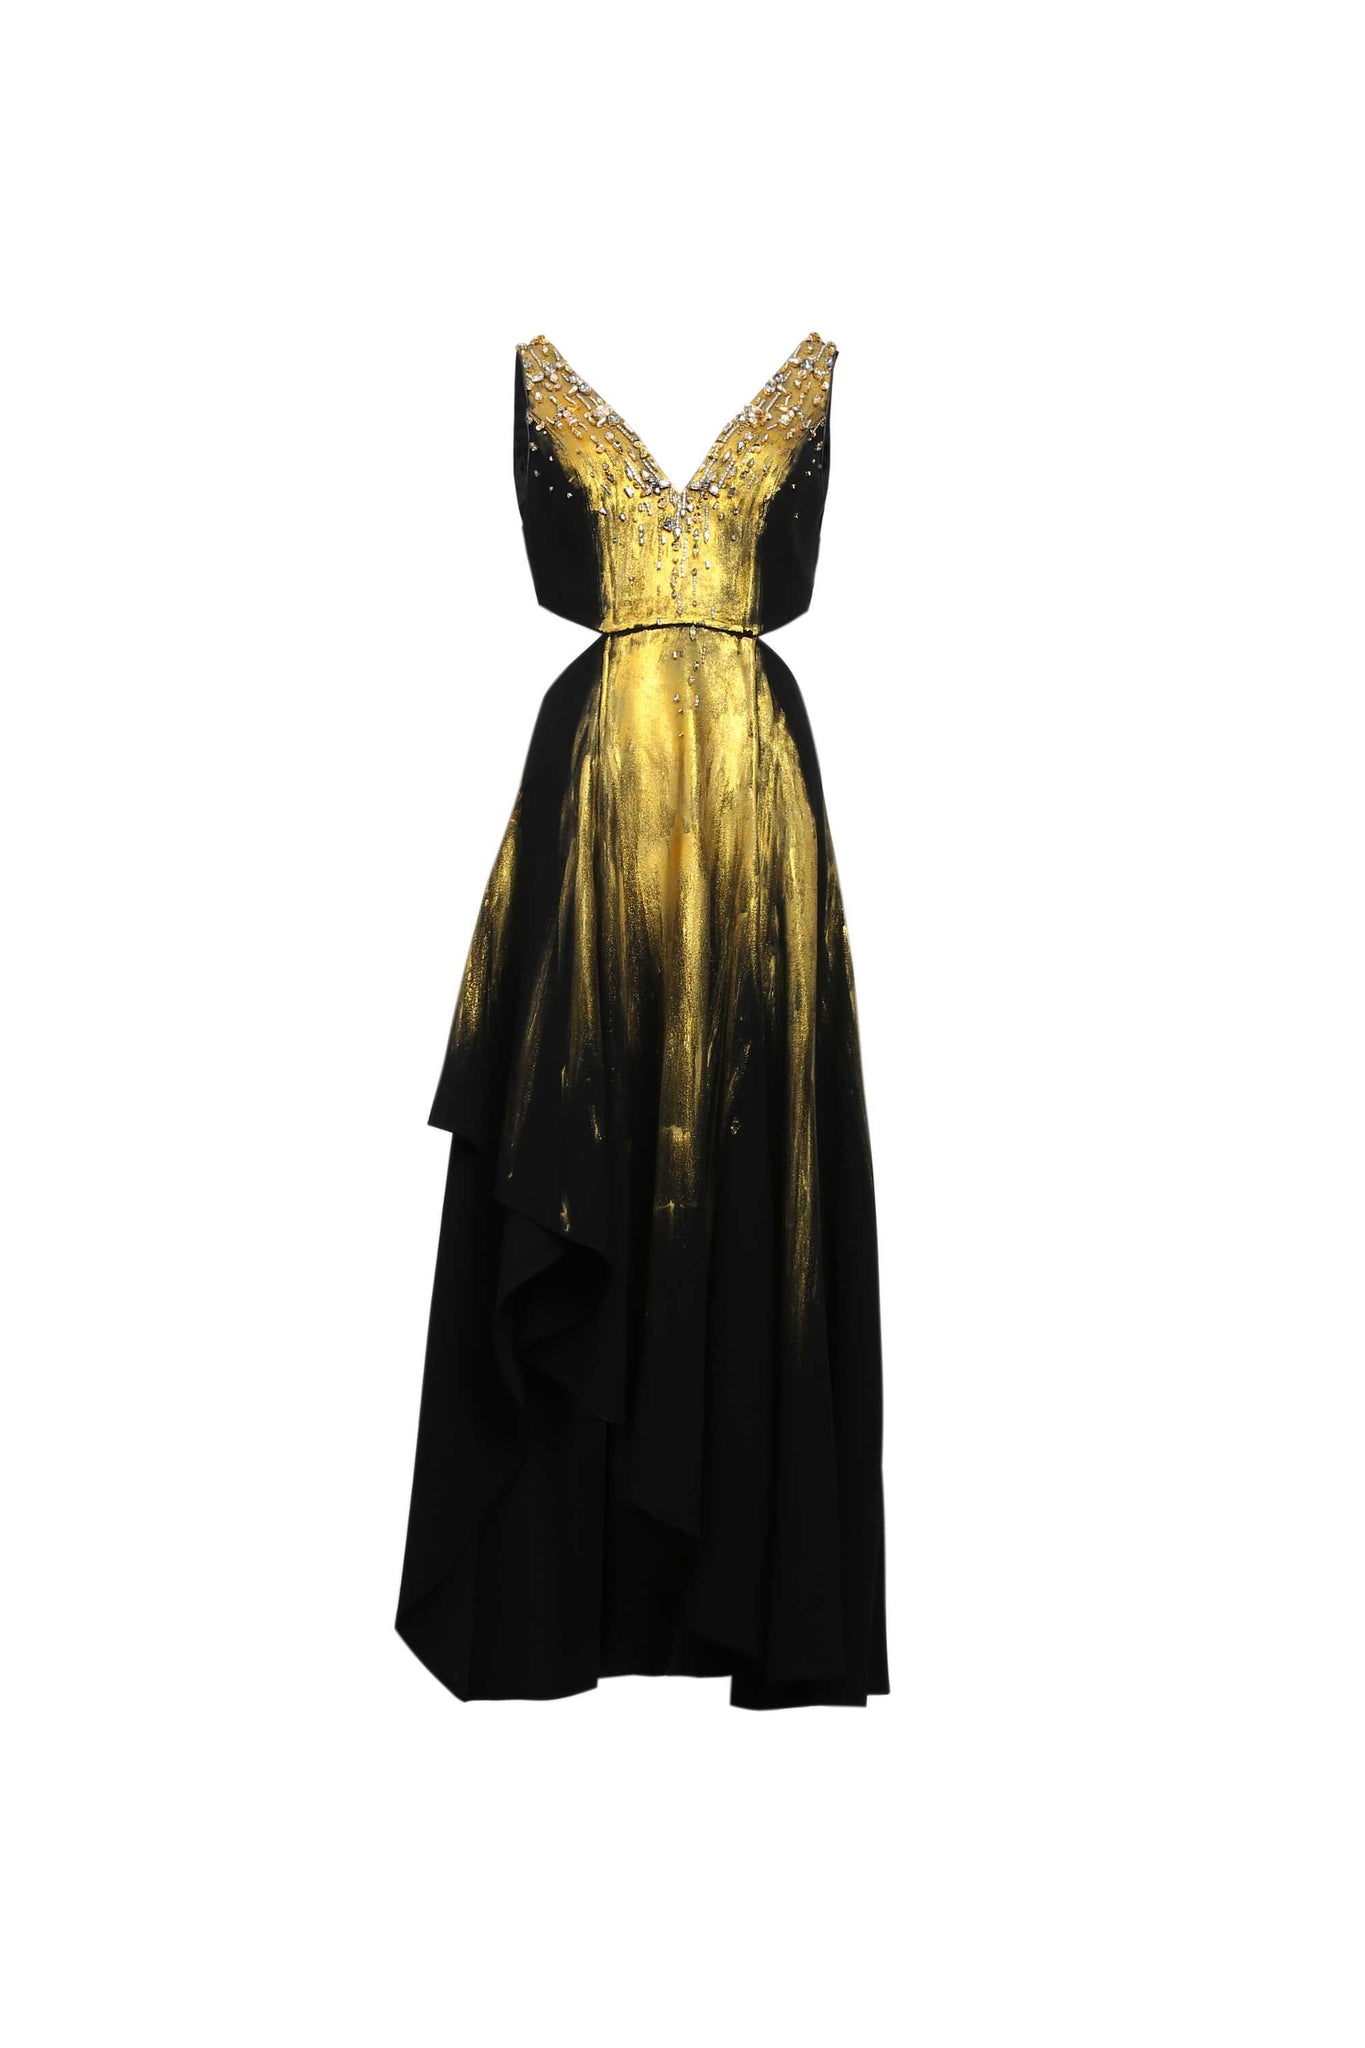 Black and Gold Cut-out Sleevless Maxi Dress